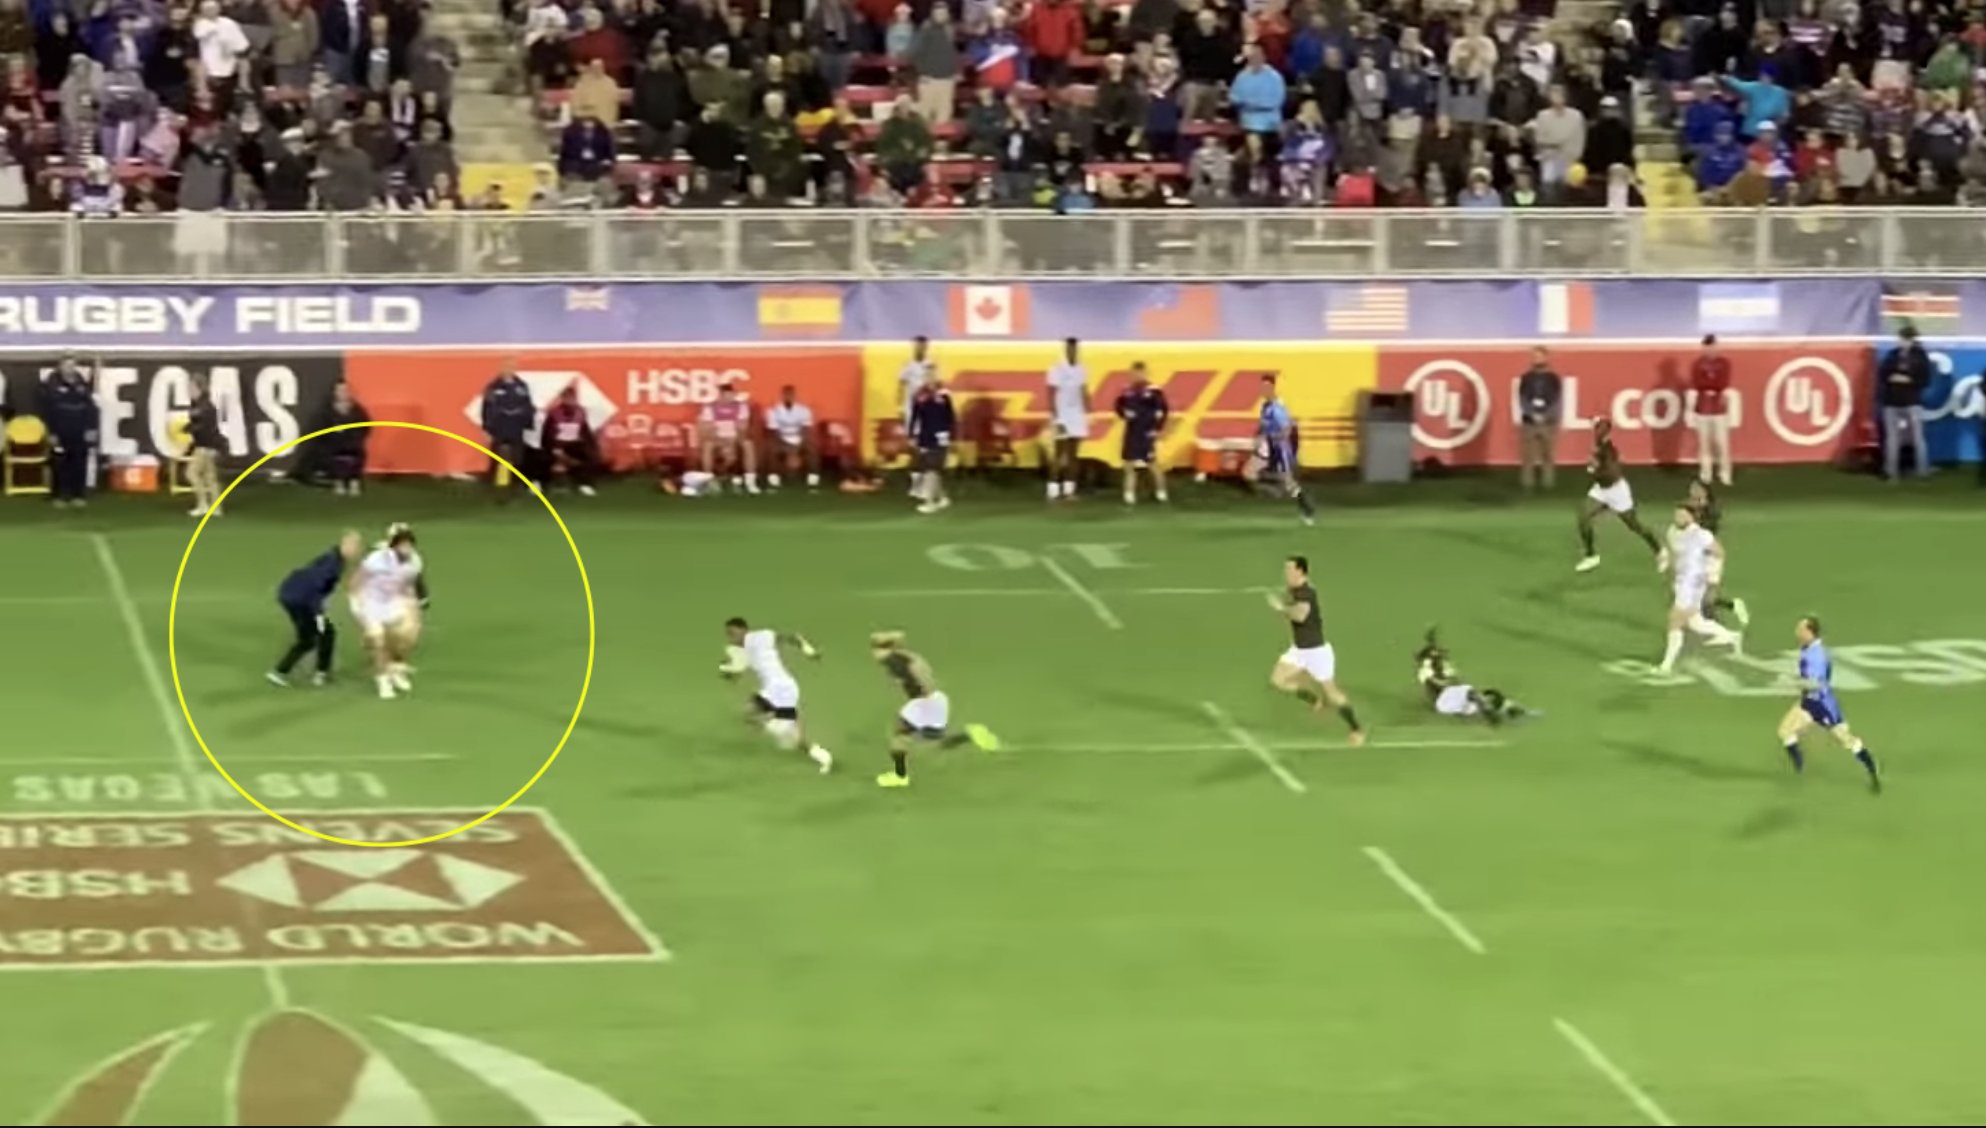 SUPERHUMAN: USA star Danny Barrett breaks his arm in the tackle, makes another tackle, then does this